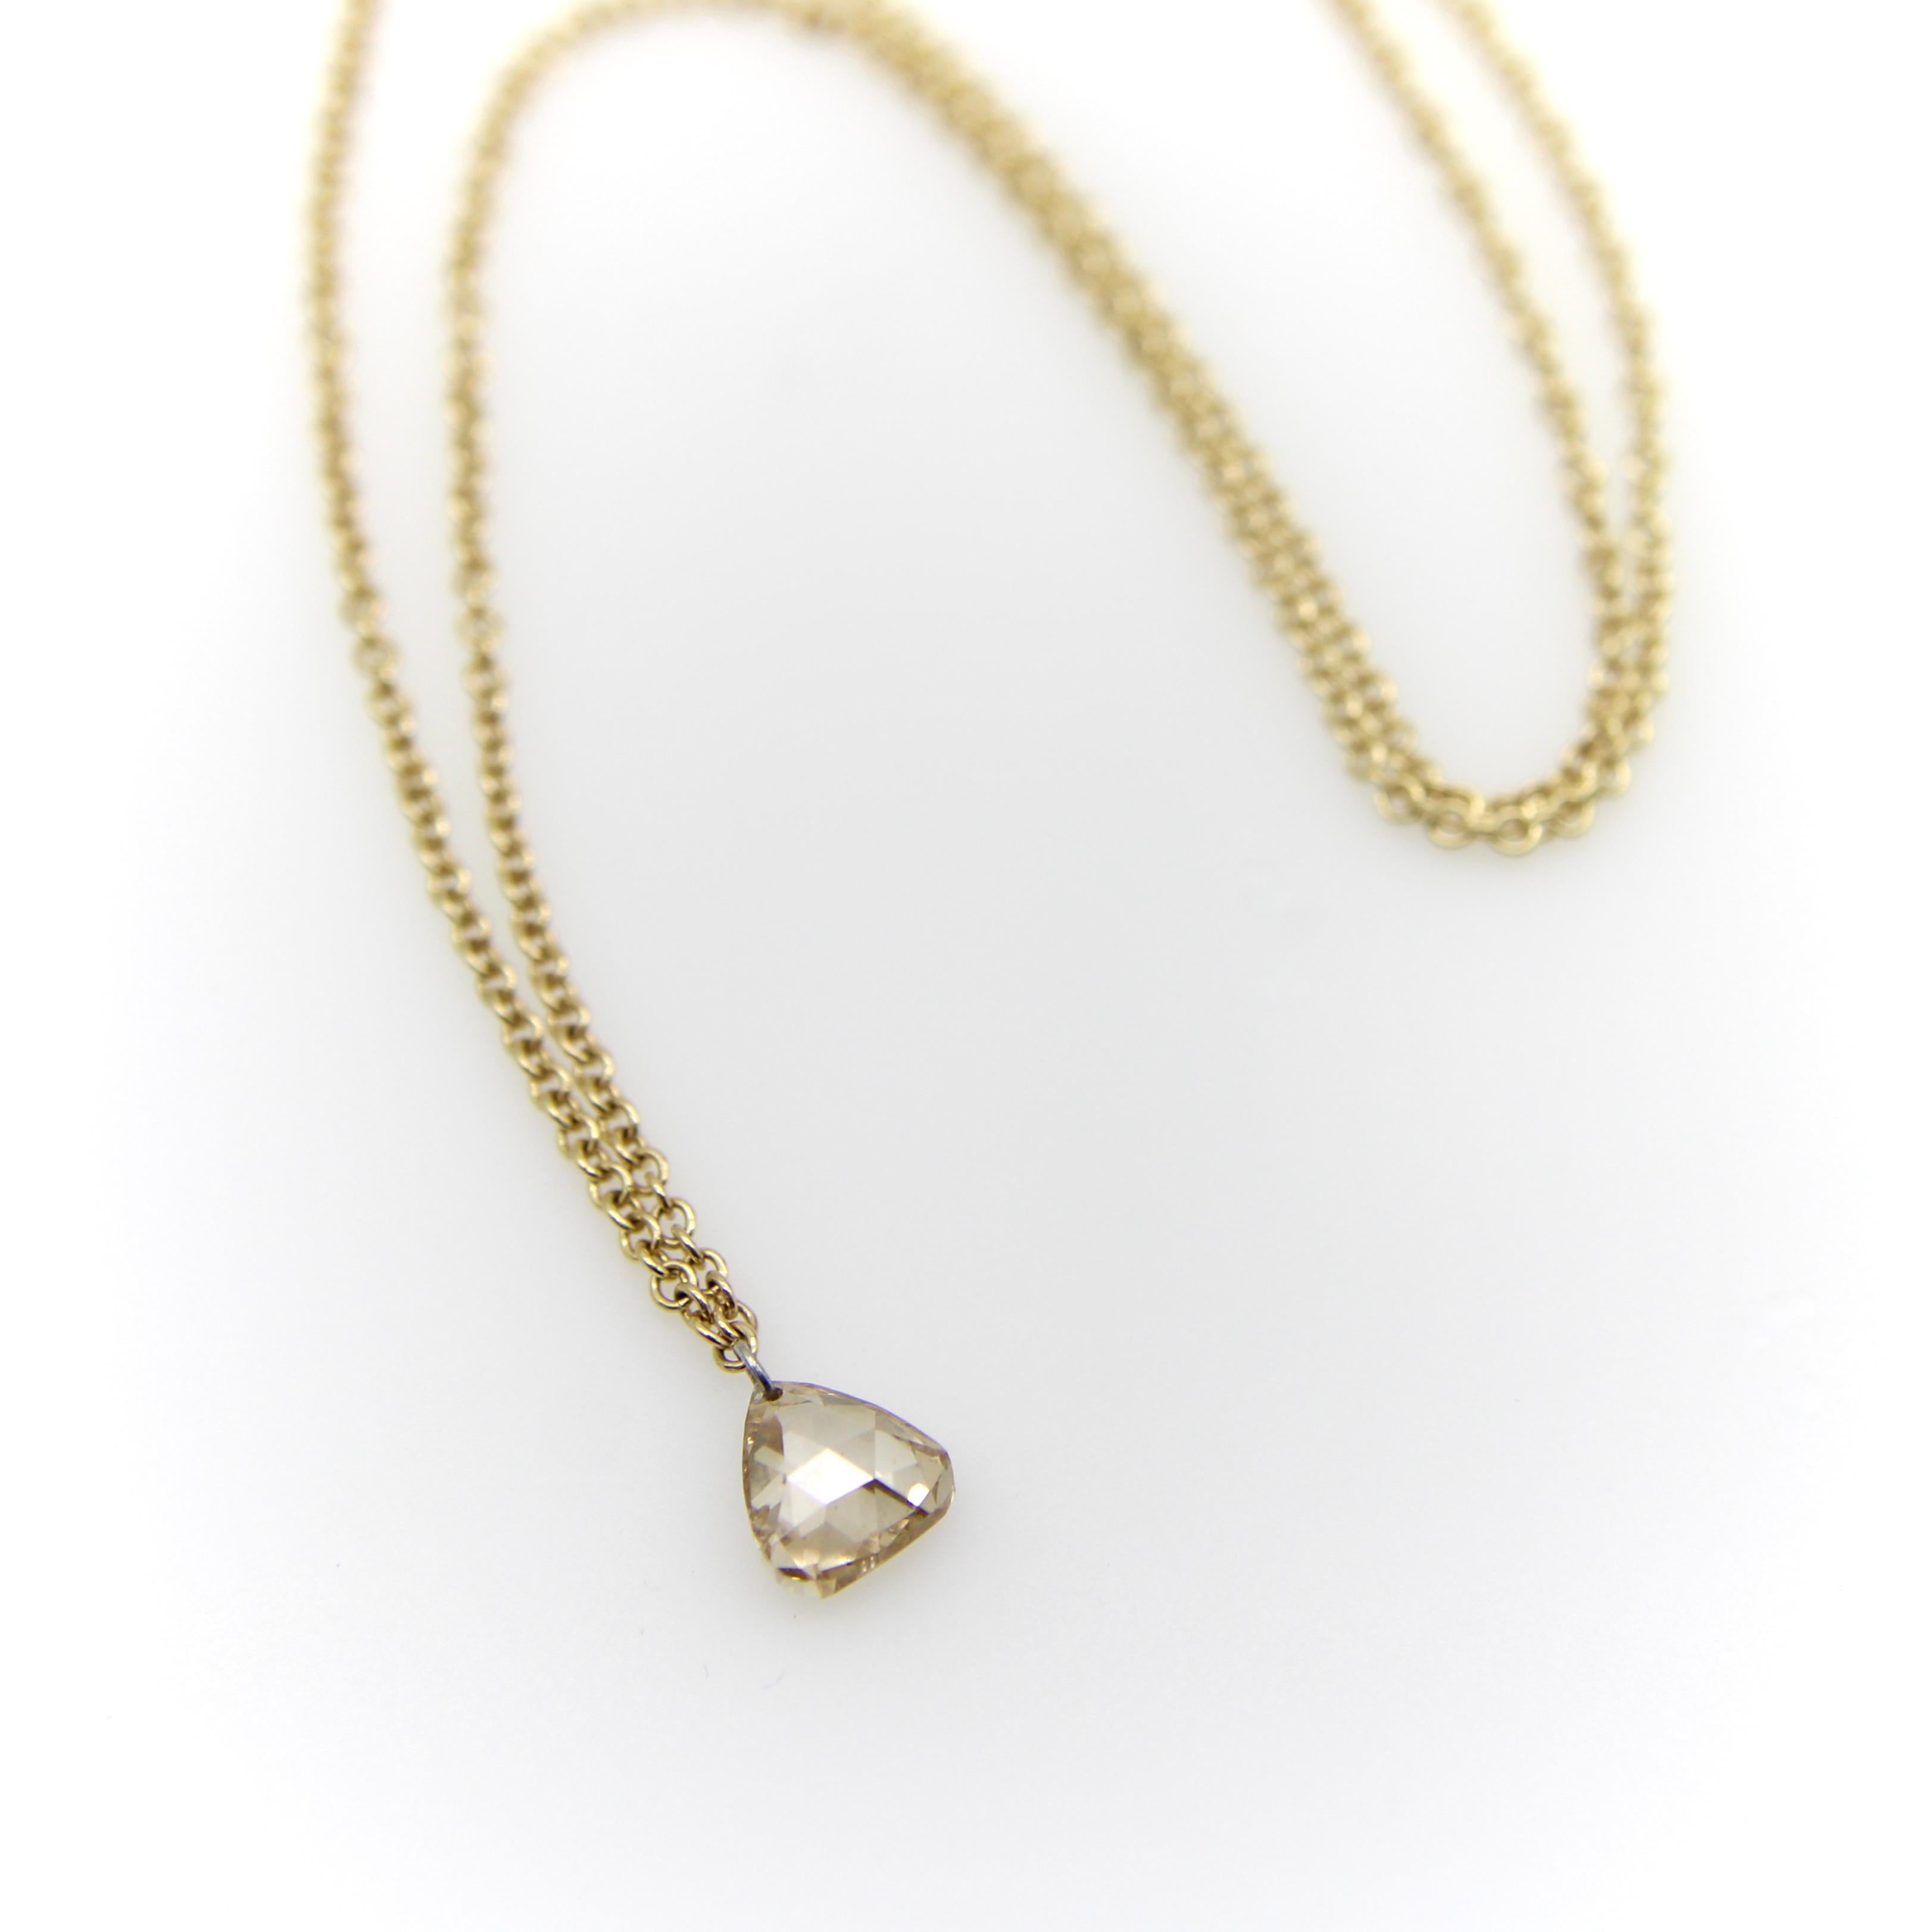 Part of our Signature Collection, we made this 14k gold and champagne diamond necklace by sending the diamond to have a tiny hole drilled in its corner so that it could dangle without a mount. To drill a diamond is a labor intensive process that